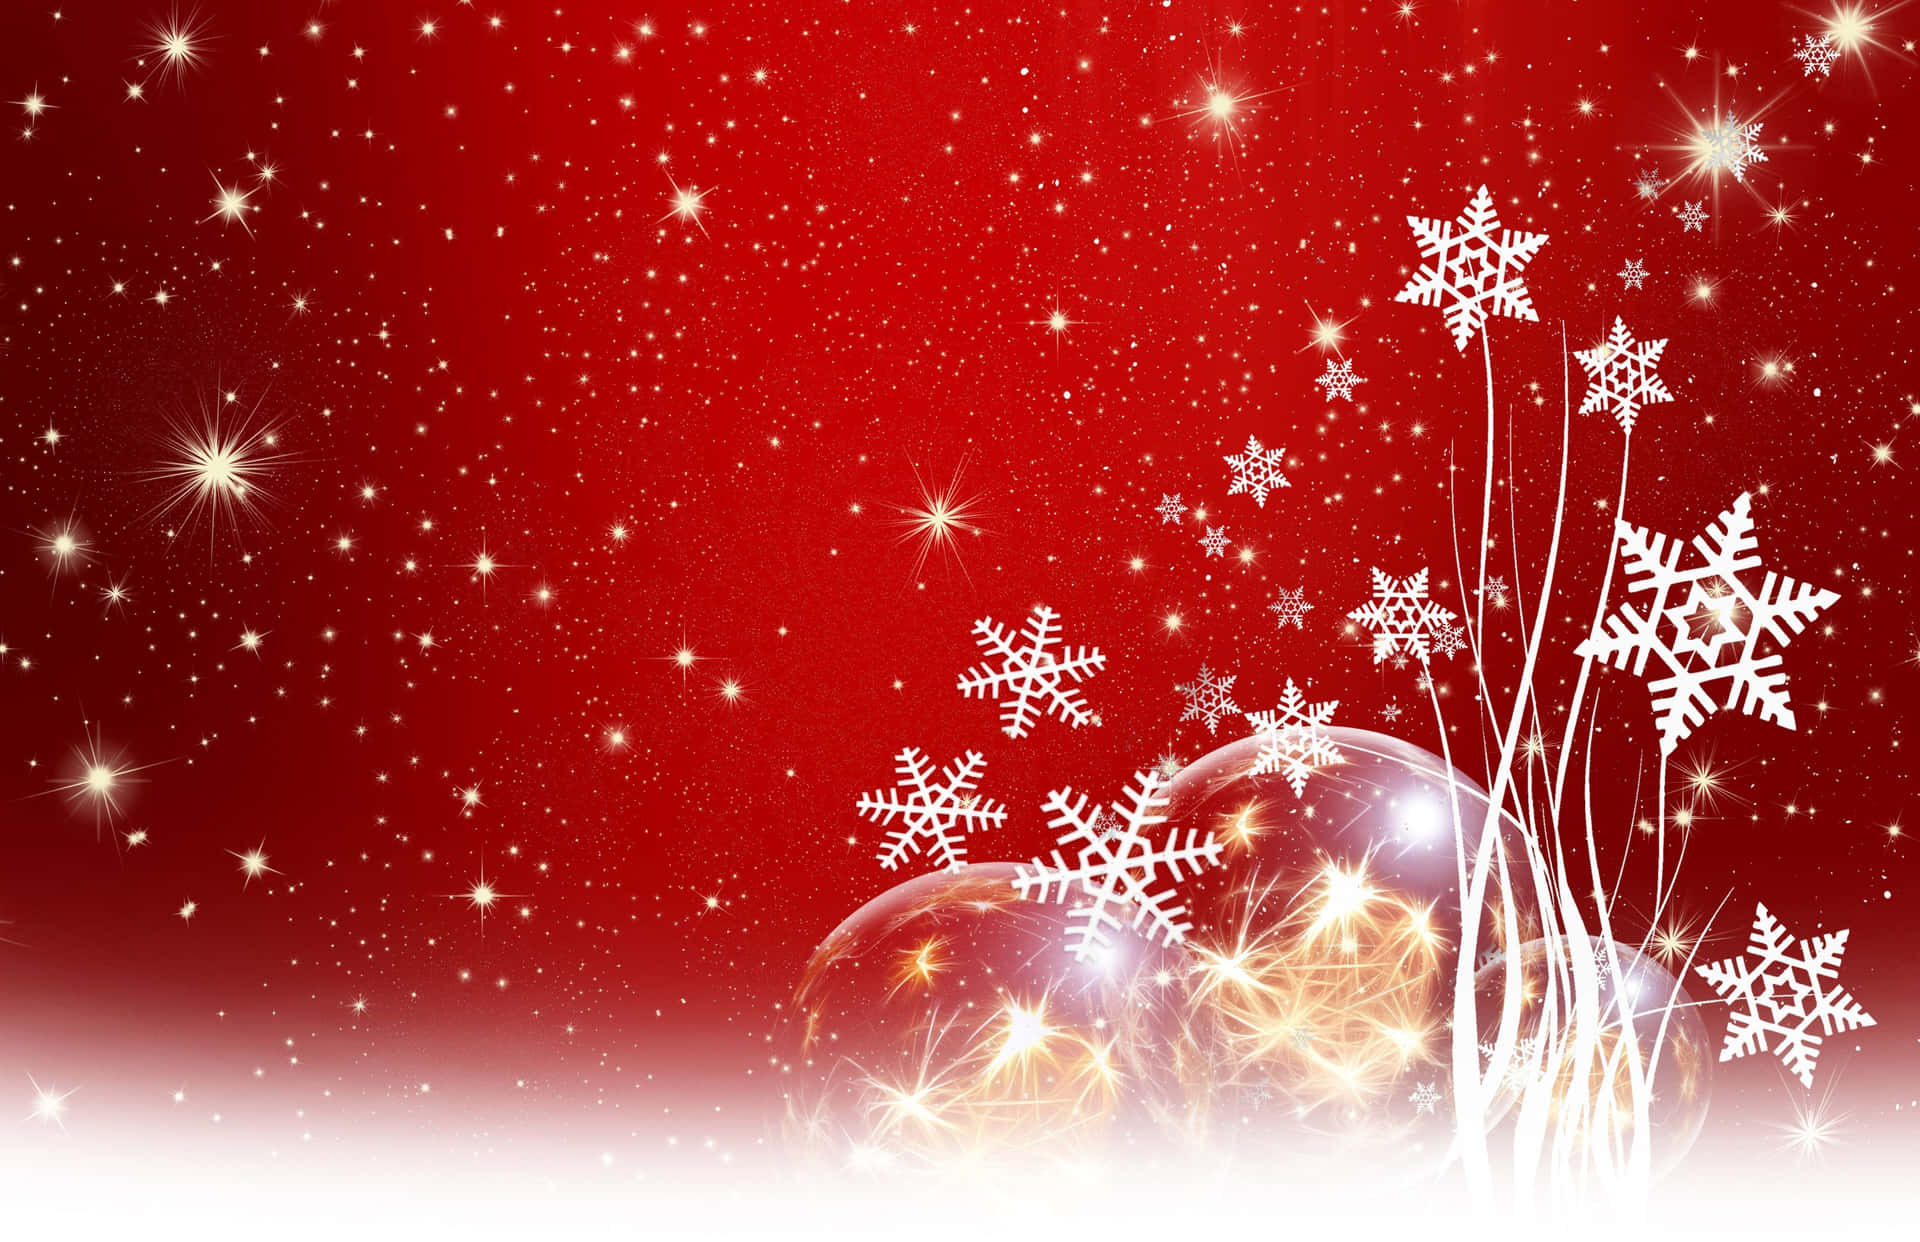 Enjoy the winter season with a Red Aesthetic Christmas Wallpaper